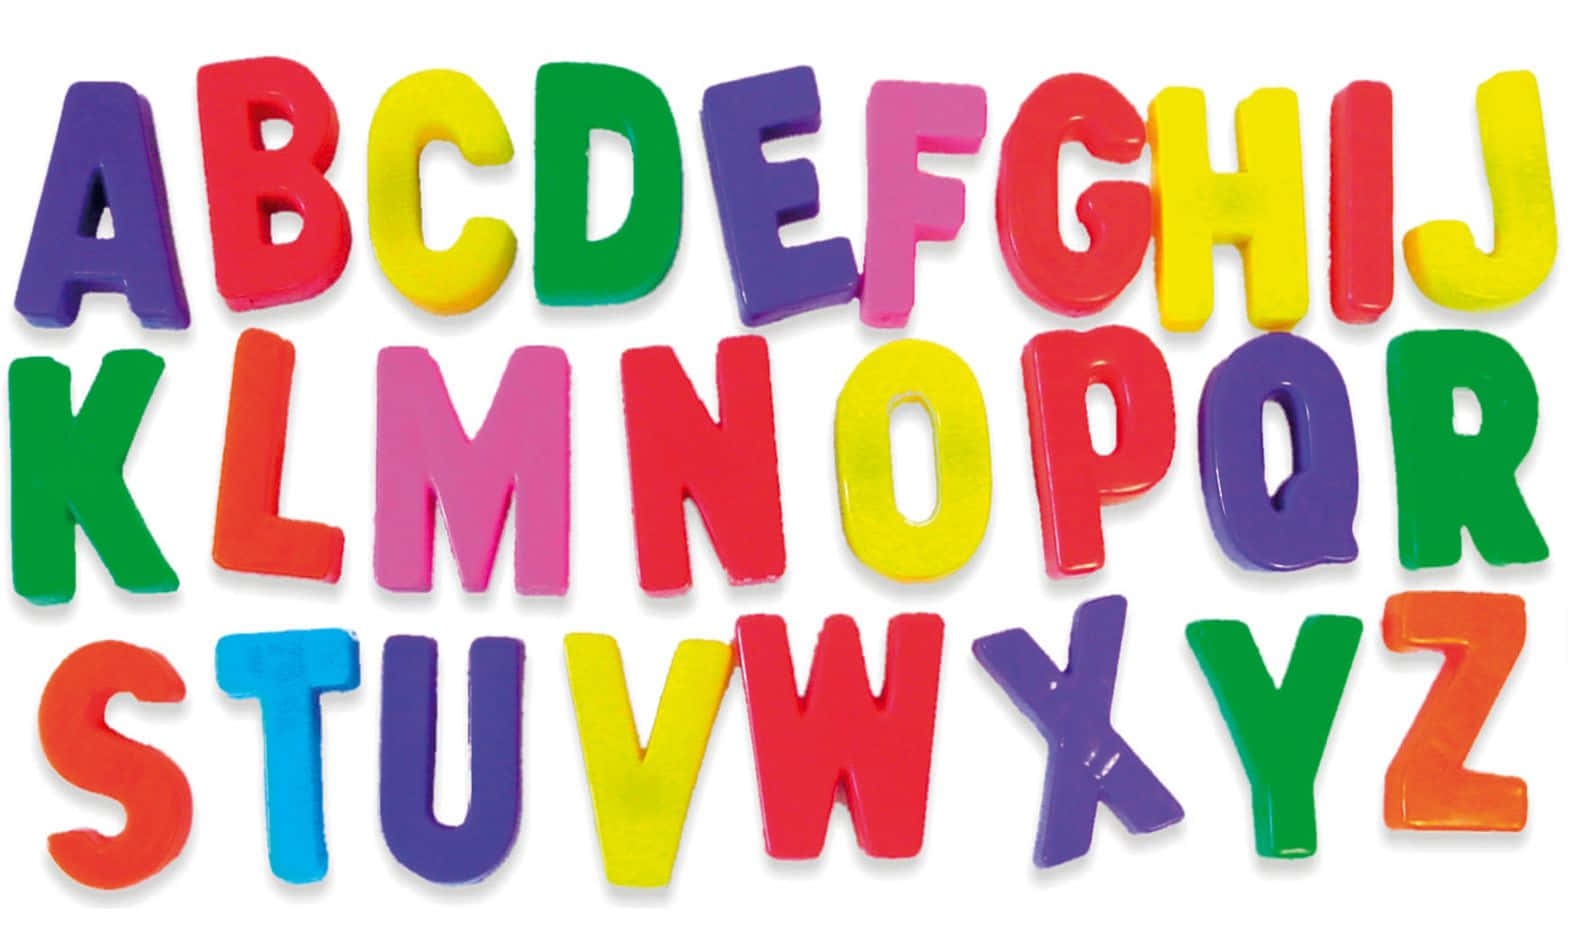 Alphabet Soup: A Colorful Explosion of Letters and Textures